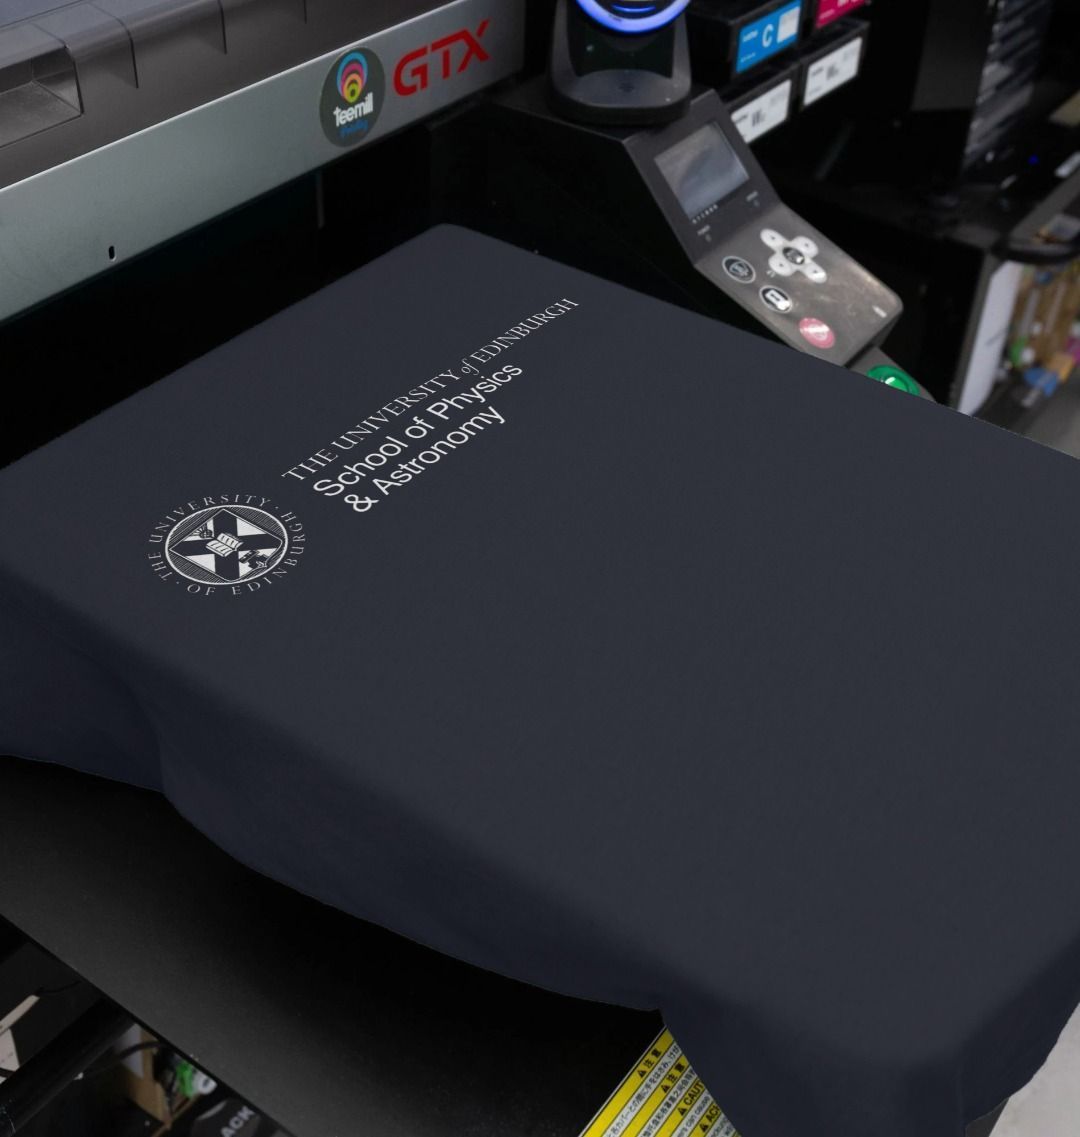 Our School of Physics & Astronomy T Shirt being printed by our print on demand partner, teemill.